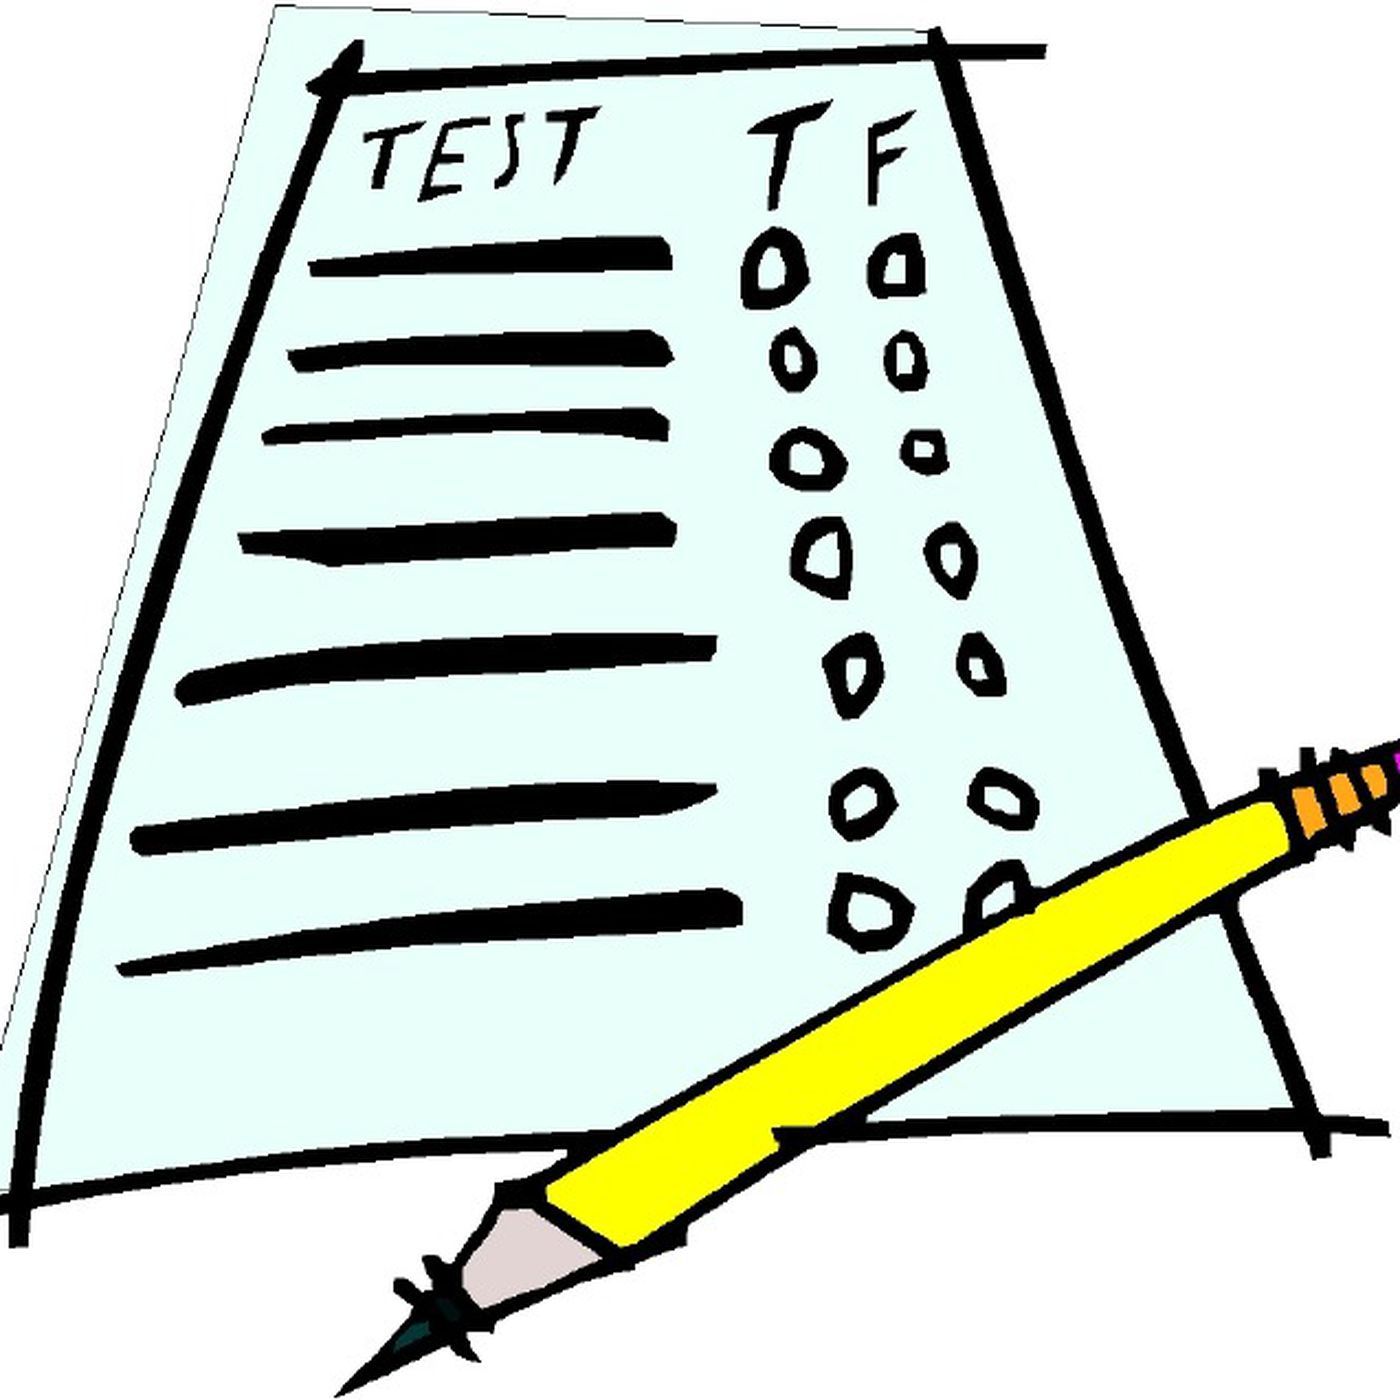 Tests competition